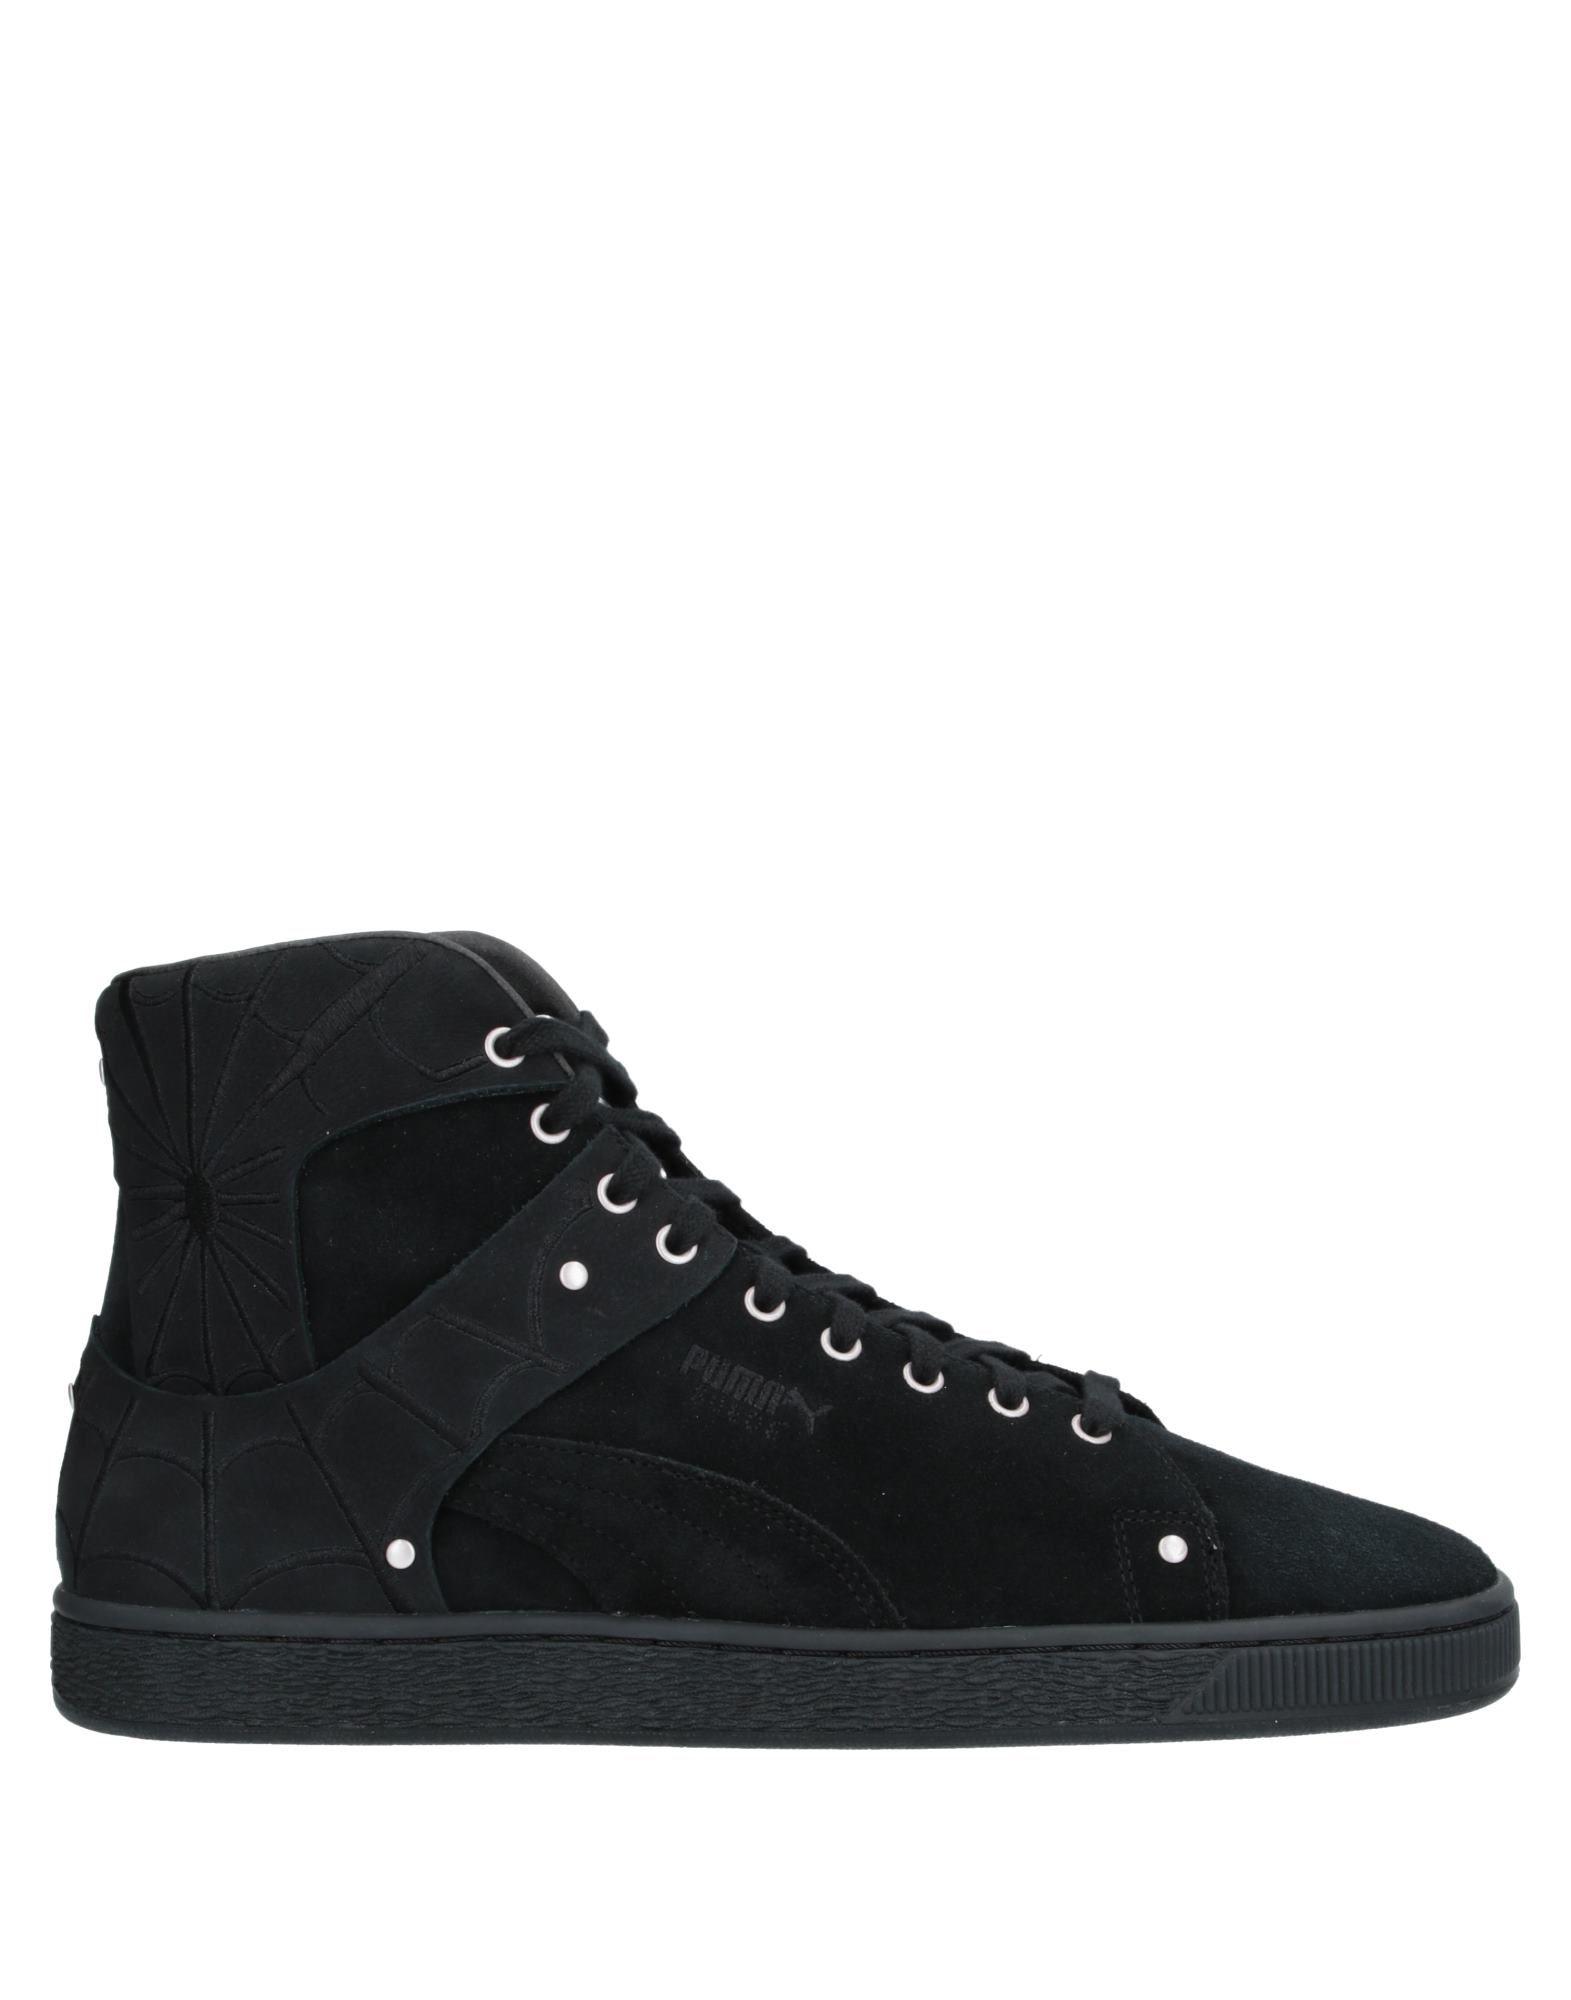 PUMA Leather High-tops & Sneakers in Black for Men - Lyst